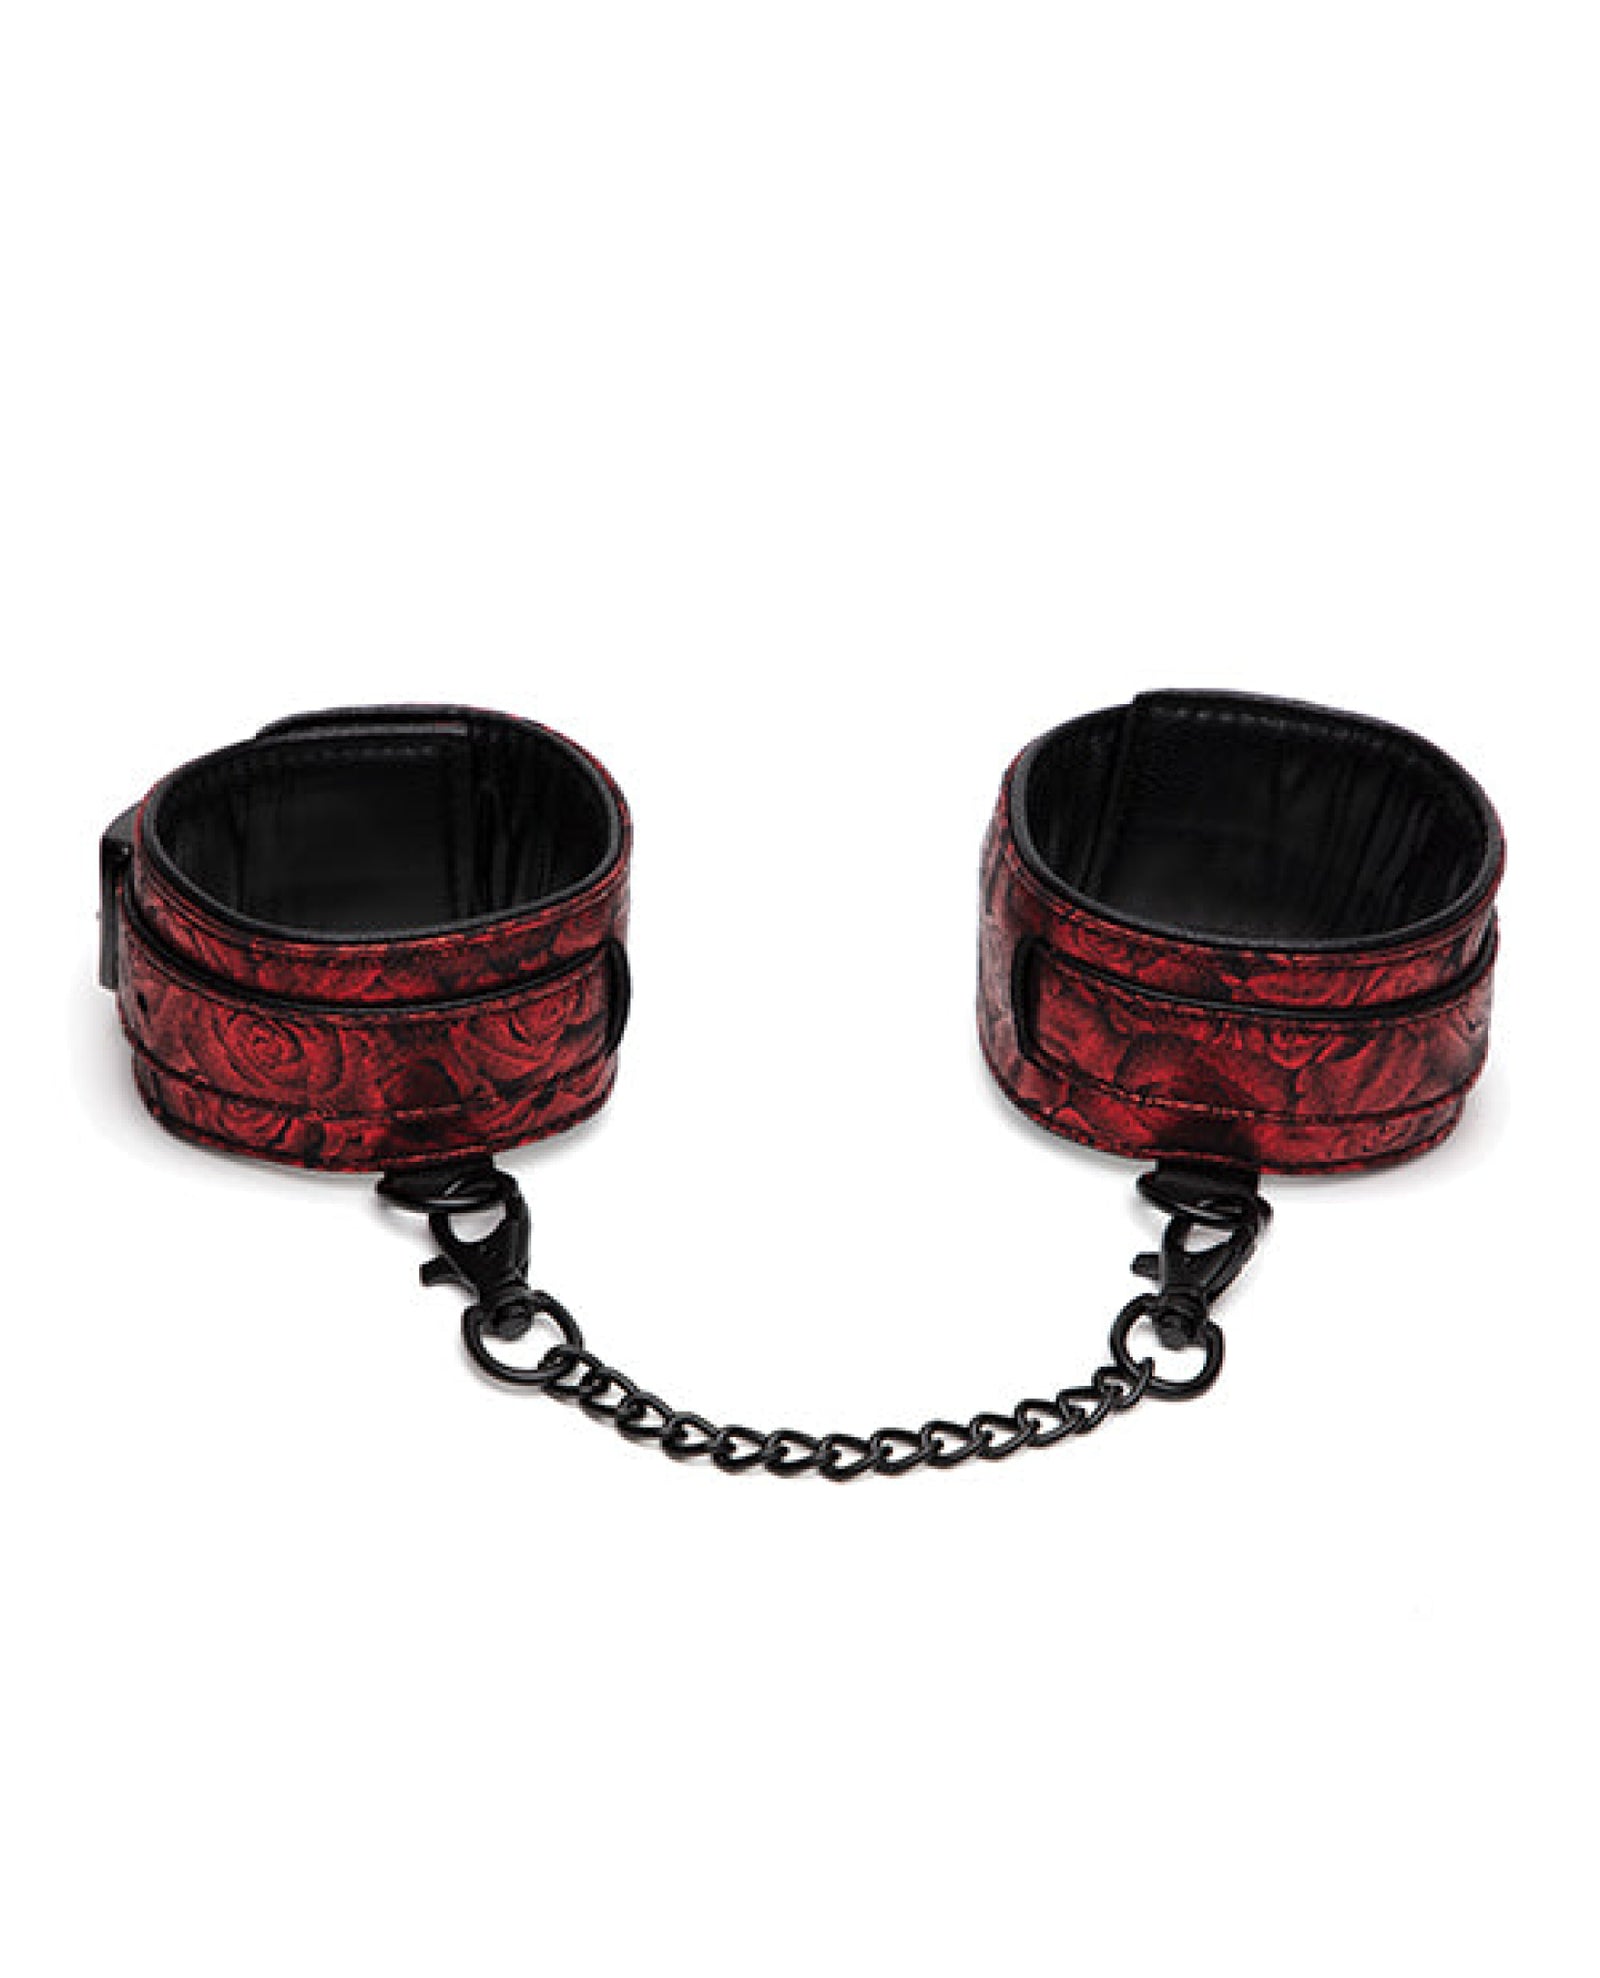 Fifty Shades Of Grey Sweet Anticipation Ankle Cuffs Lovehoney Ltd